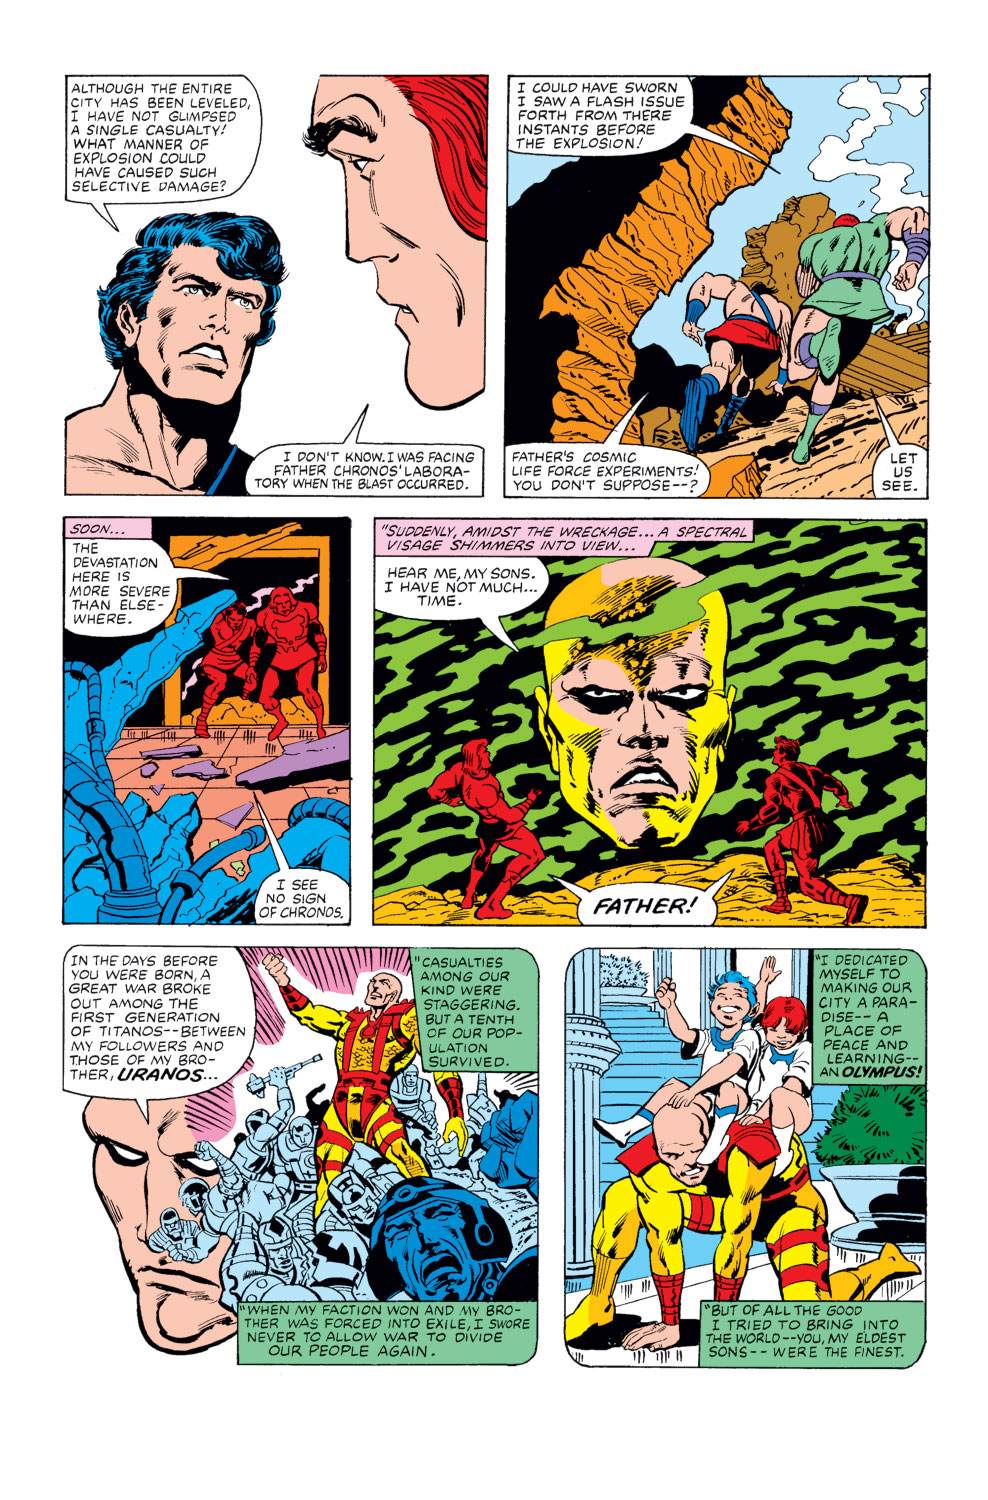 What If? (1977) issue 25 - Thor and the Avengers battled the gods - Page 35